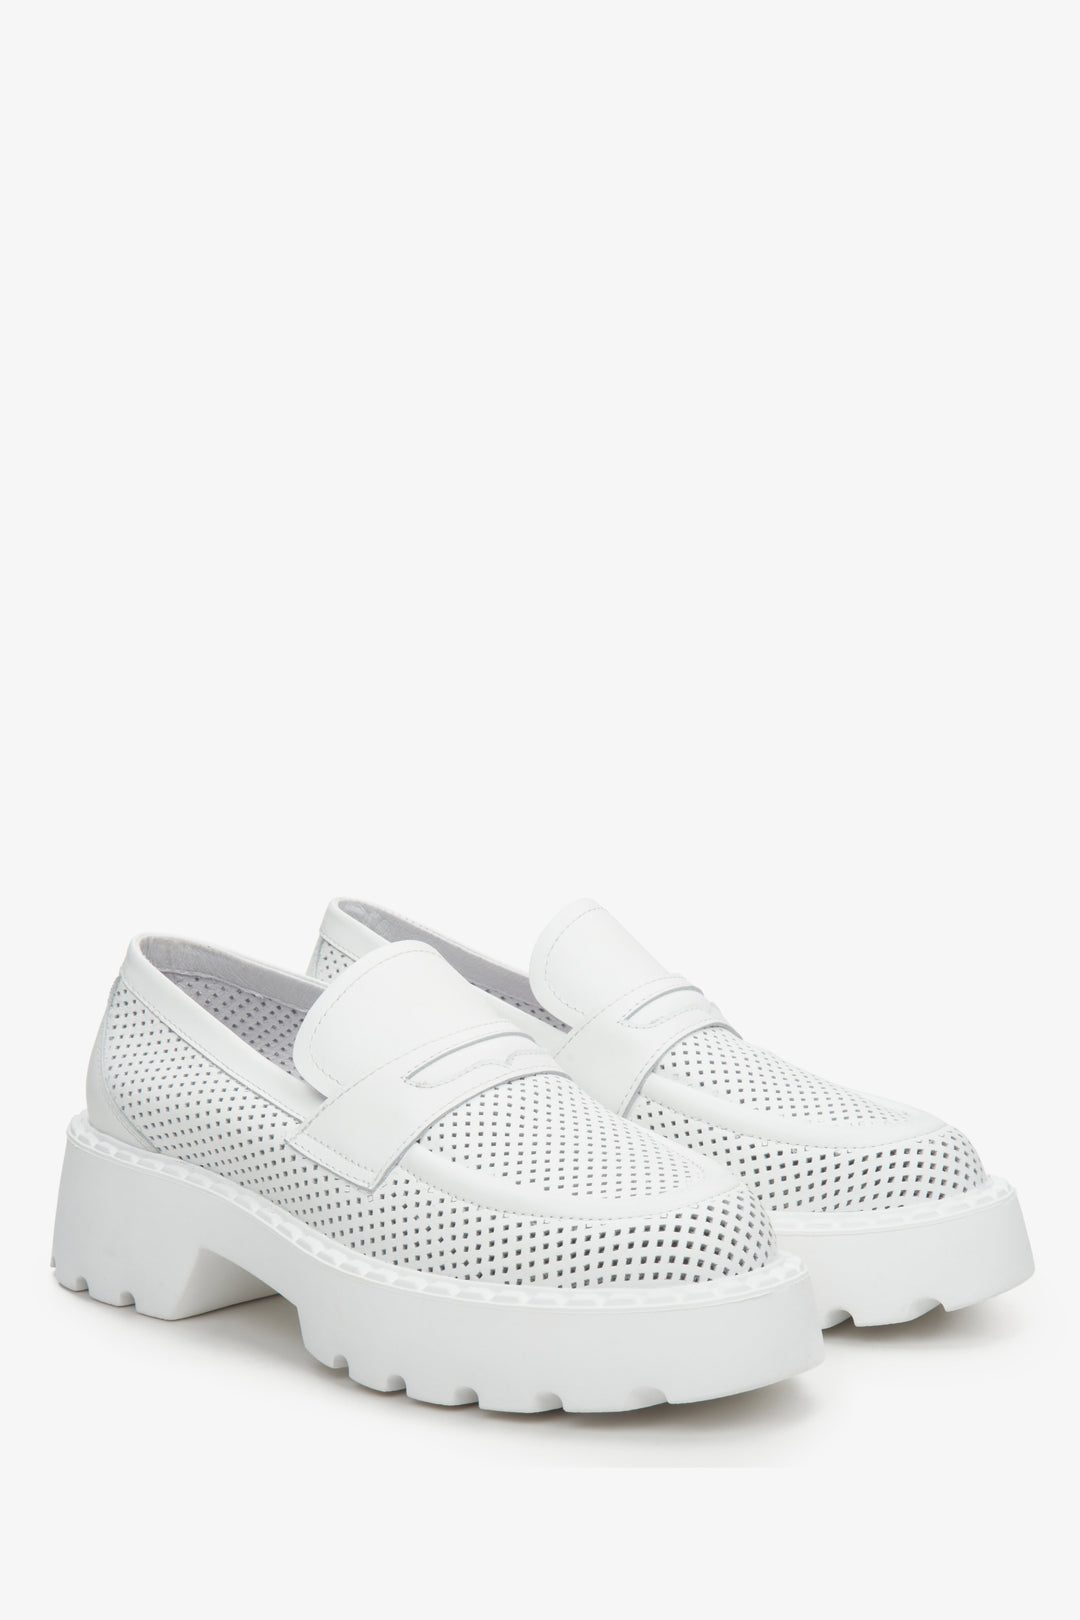 White leather loafers for women Estro with perforation - presentation of the top of the shoe and the side vest.